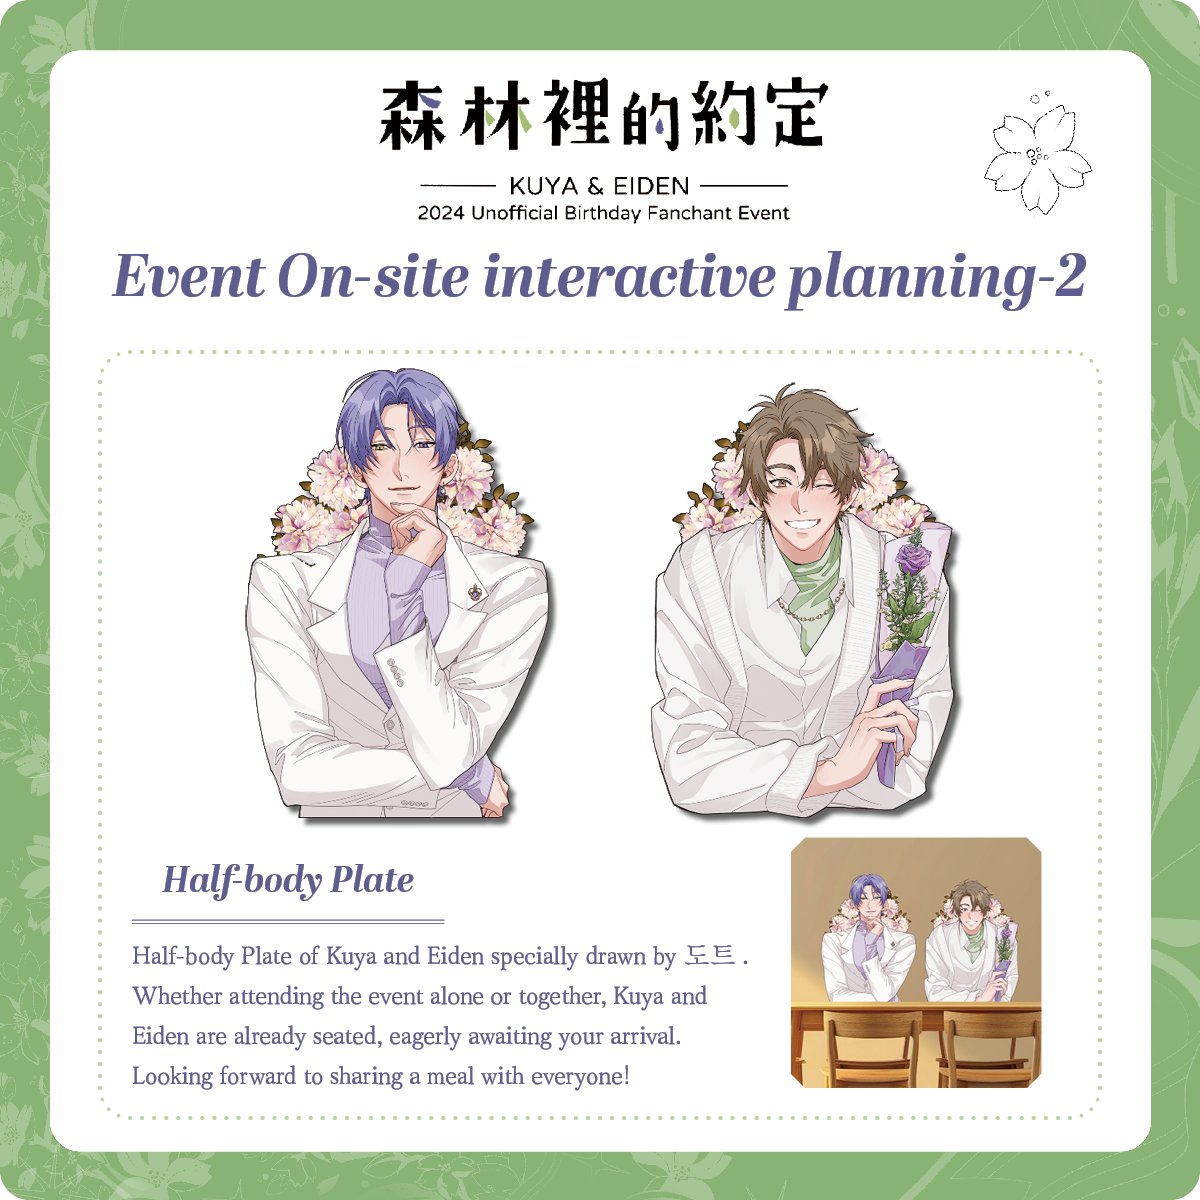 【Event On-site interactive planning - 2🥂】

The yokai are also busy decorating the banquet venue today, which is gradually becoming more enriched.

'Isn't it time to start reviewing dining etiquette now that we'll be dining with Kuya and Eiden?'

#NUCarnival